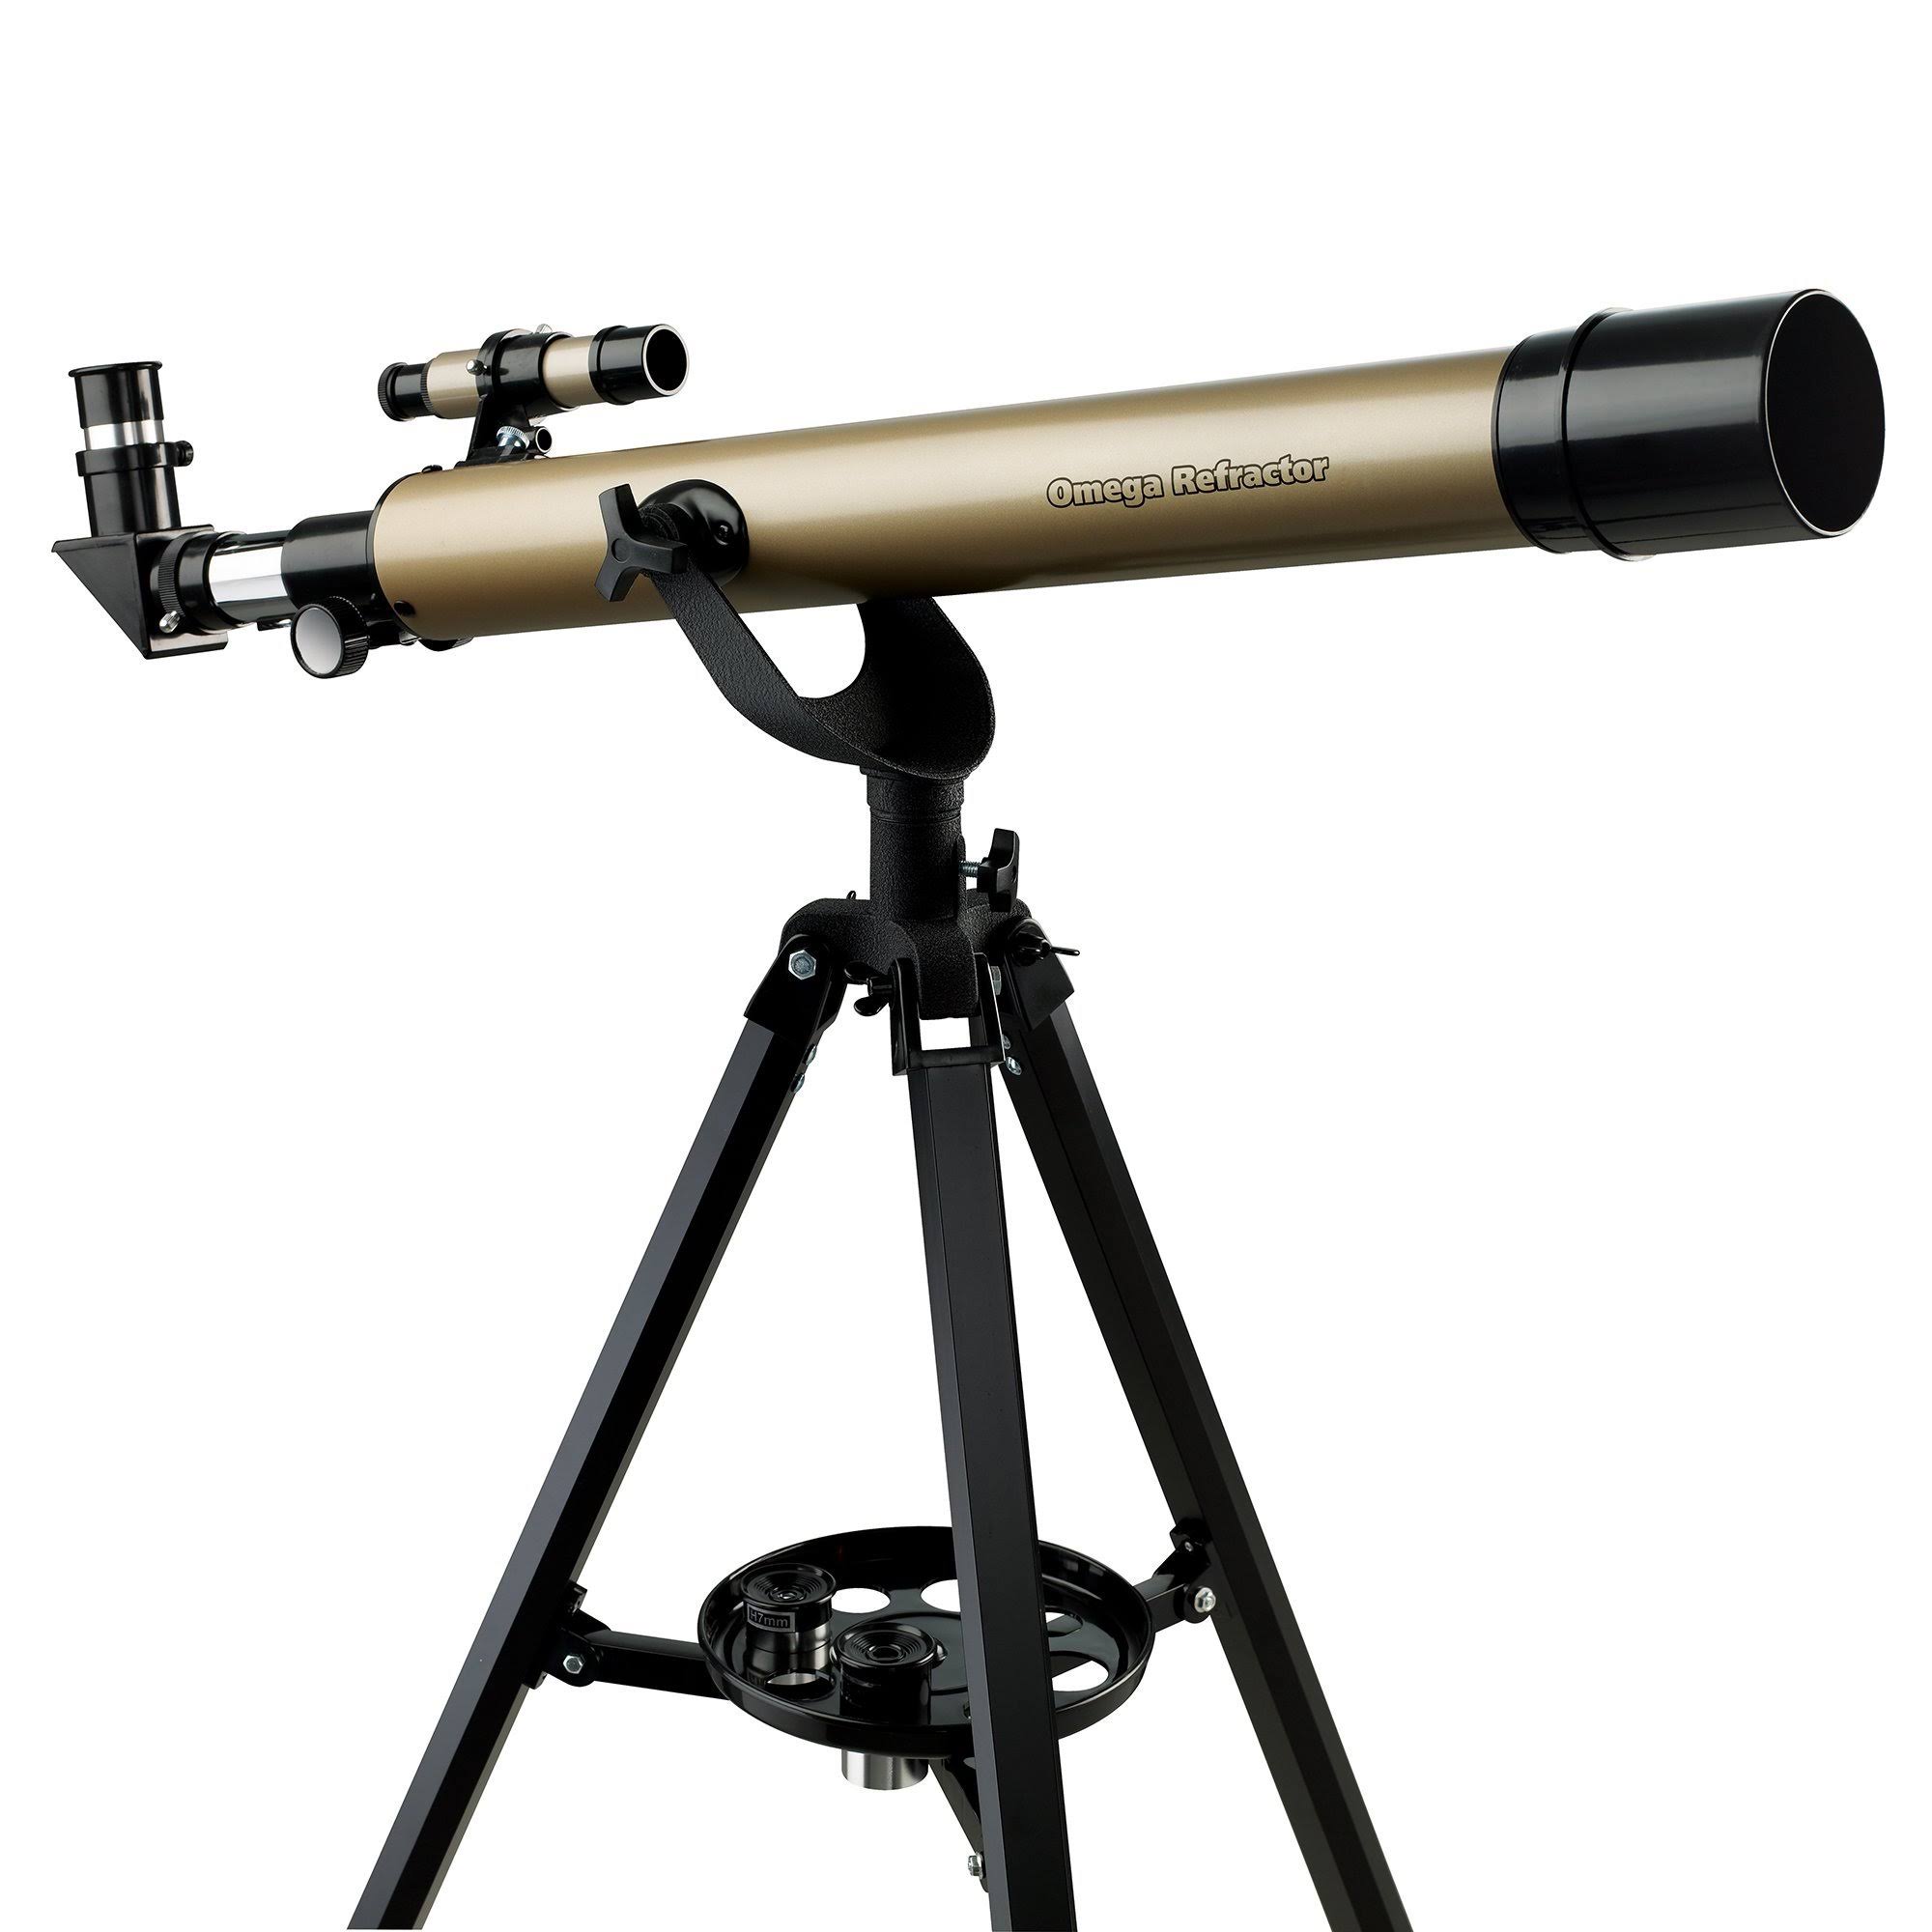 Educational Insights Omega Refractor Telescope - 30x to 200x